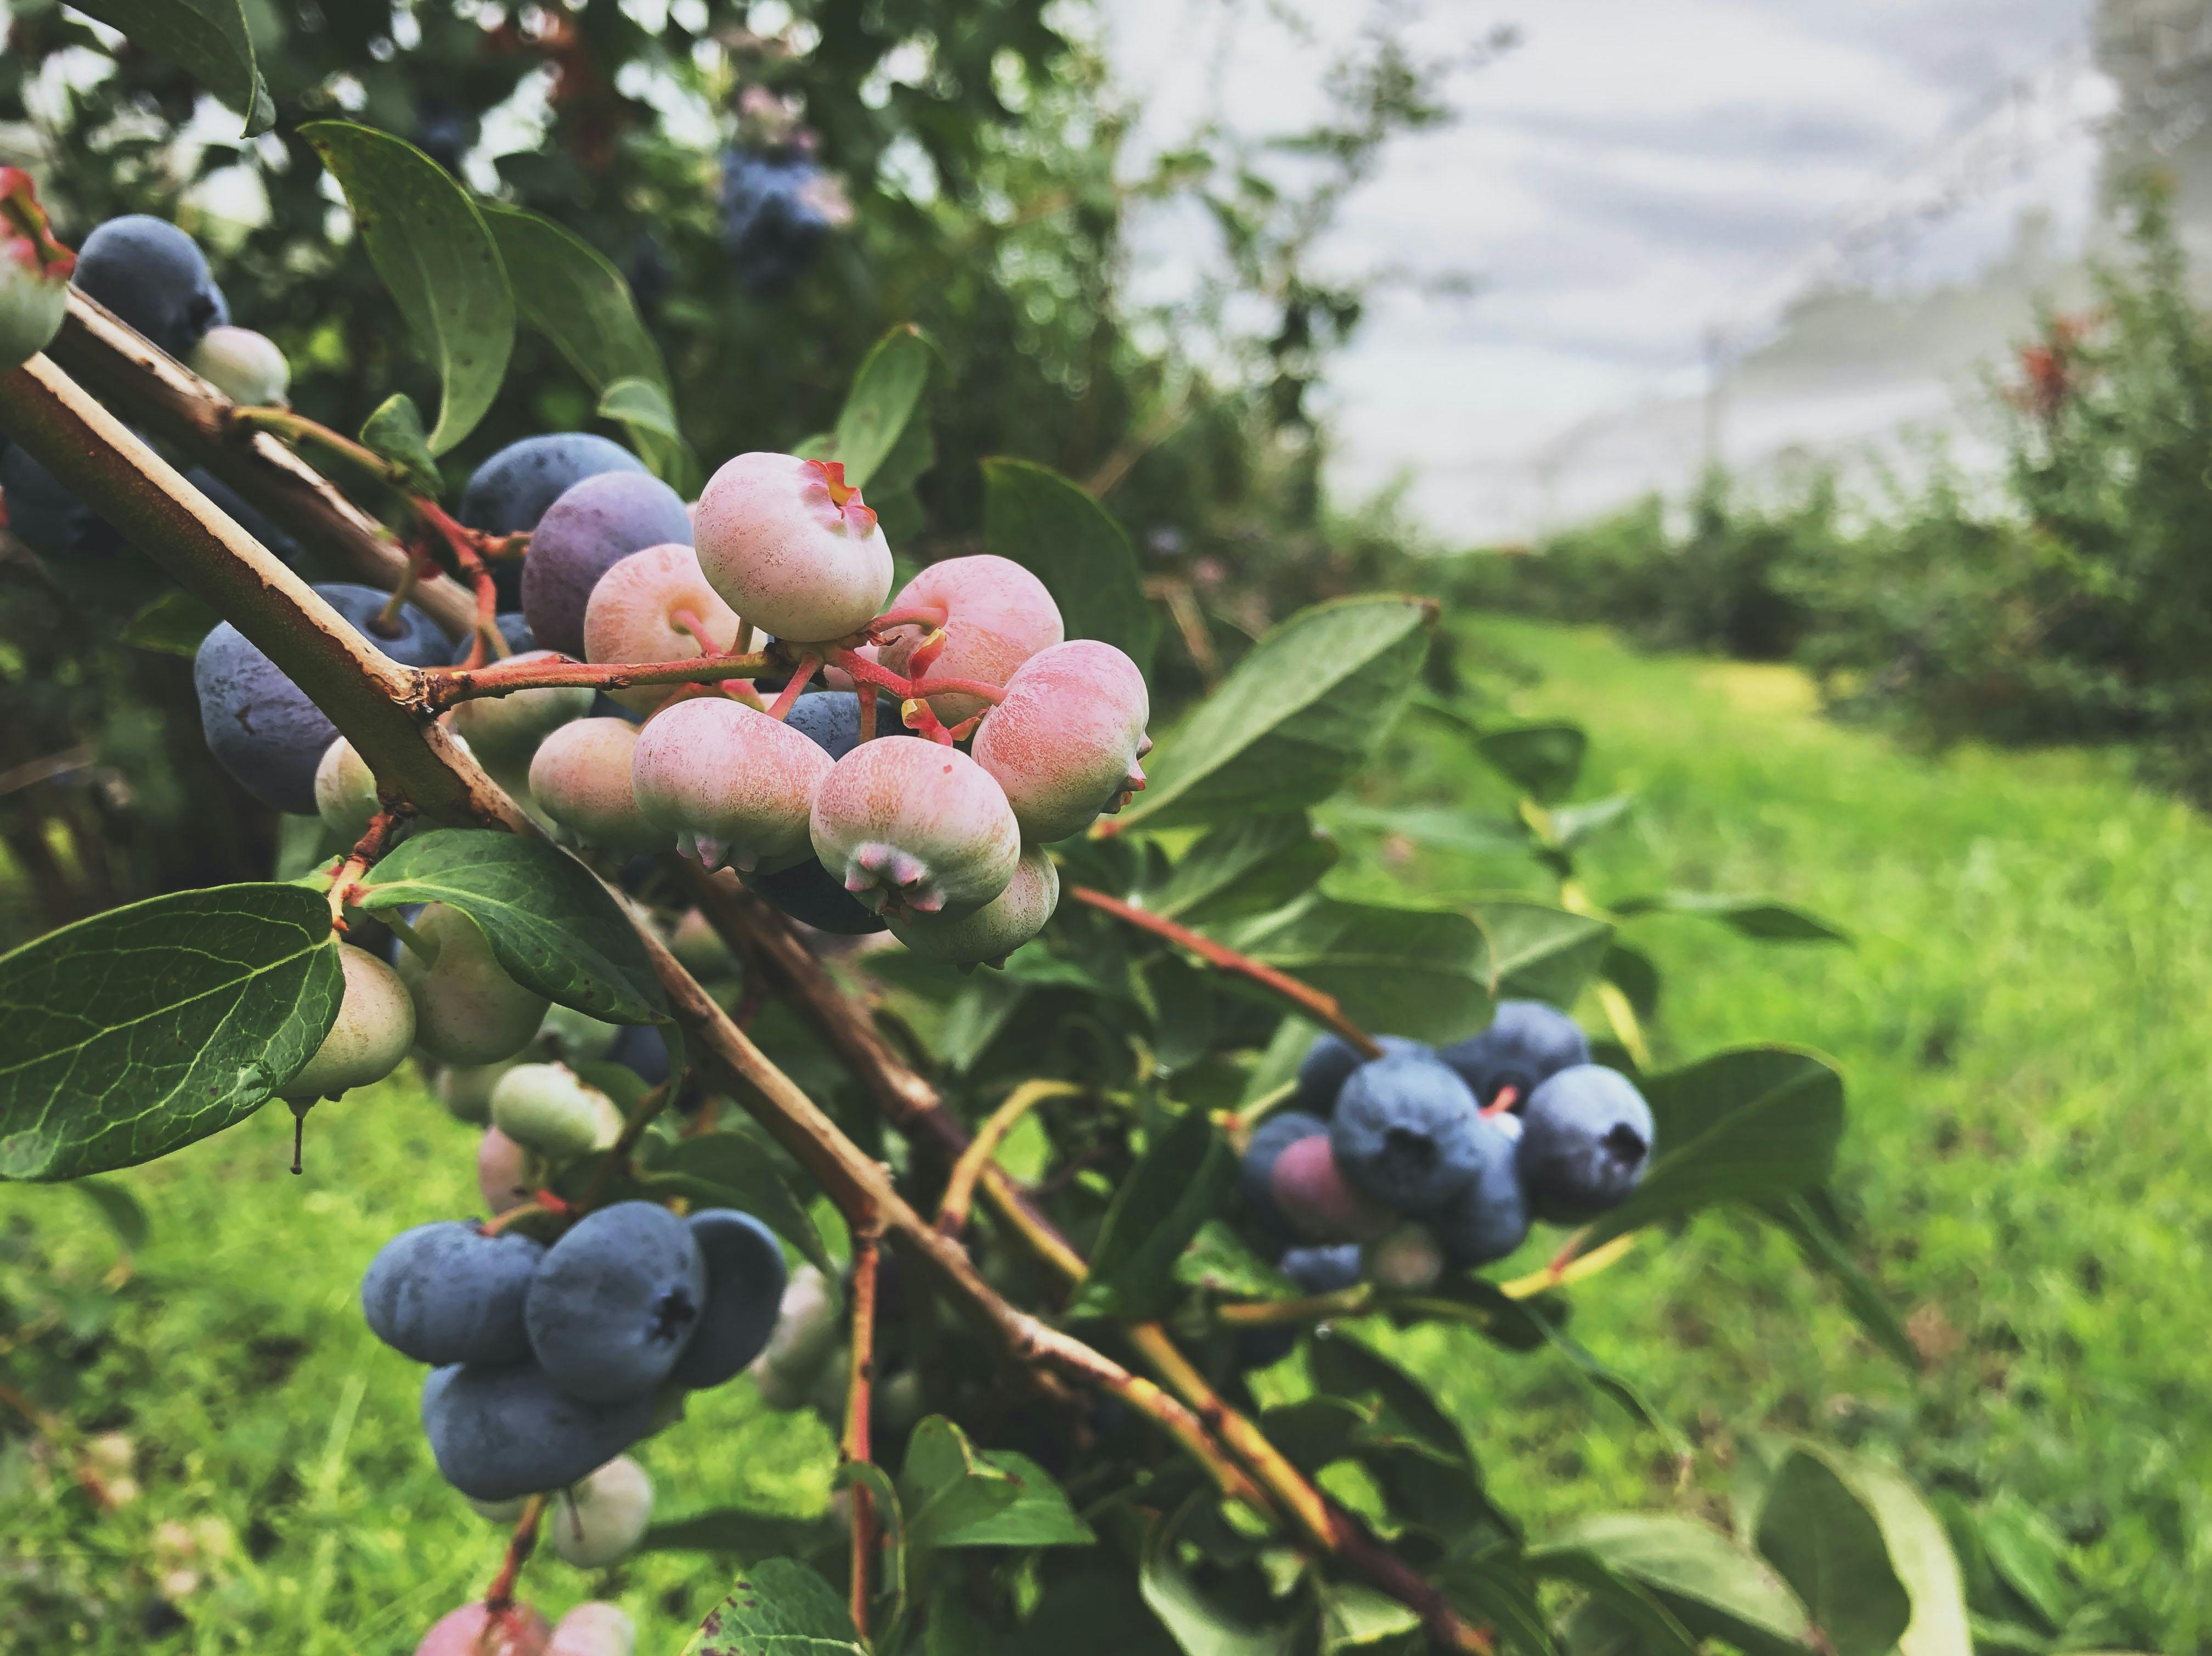 Blueberries are a good perennial fruit